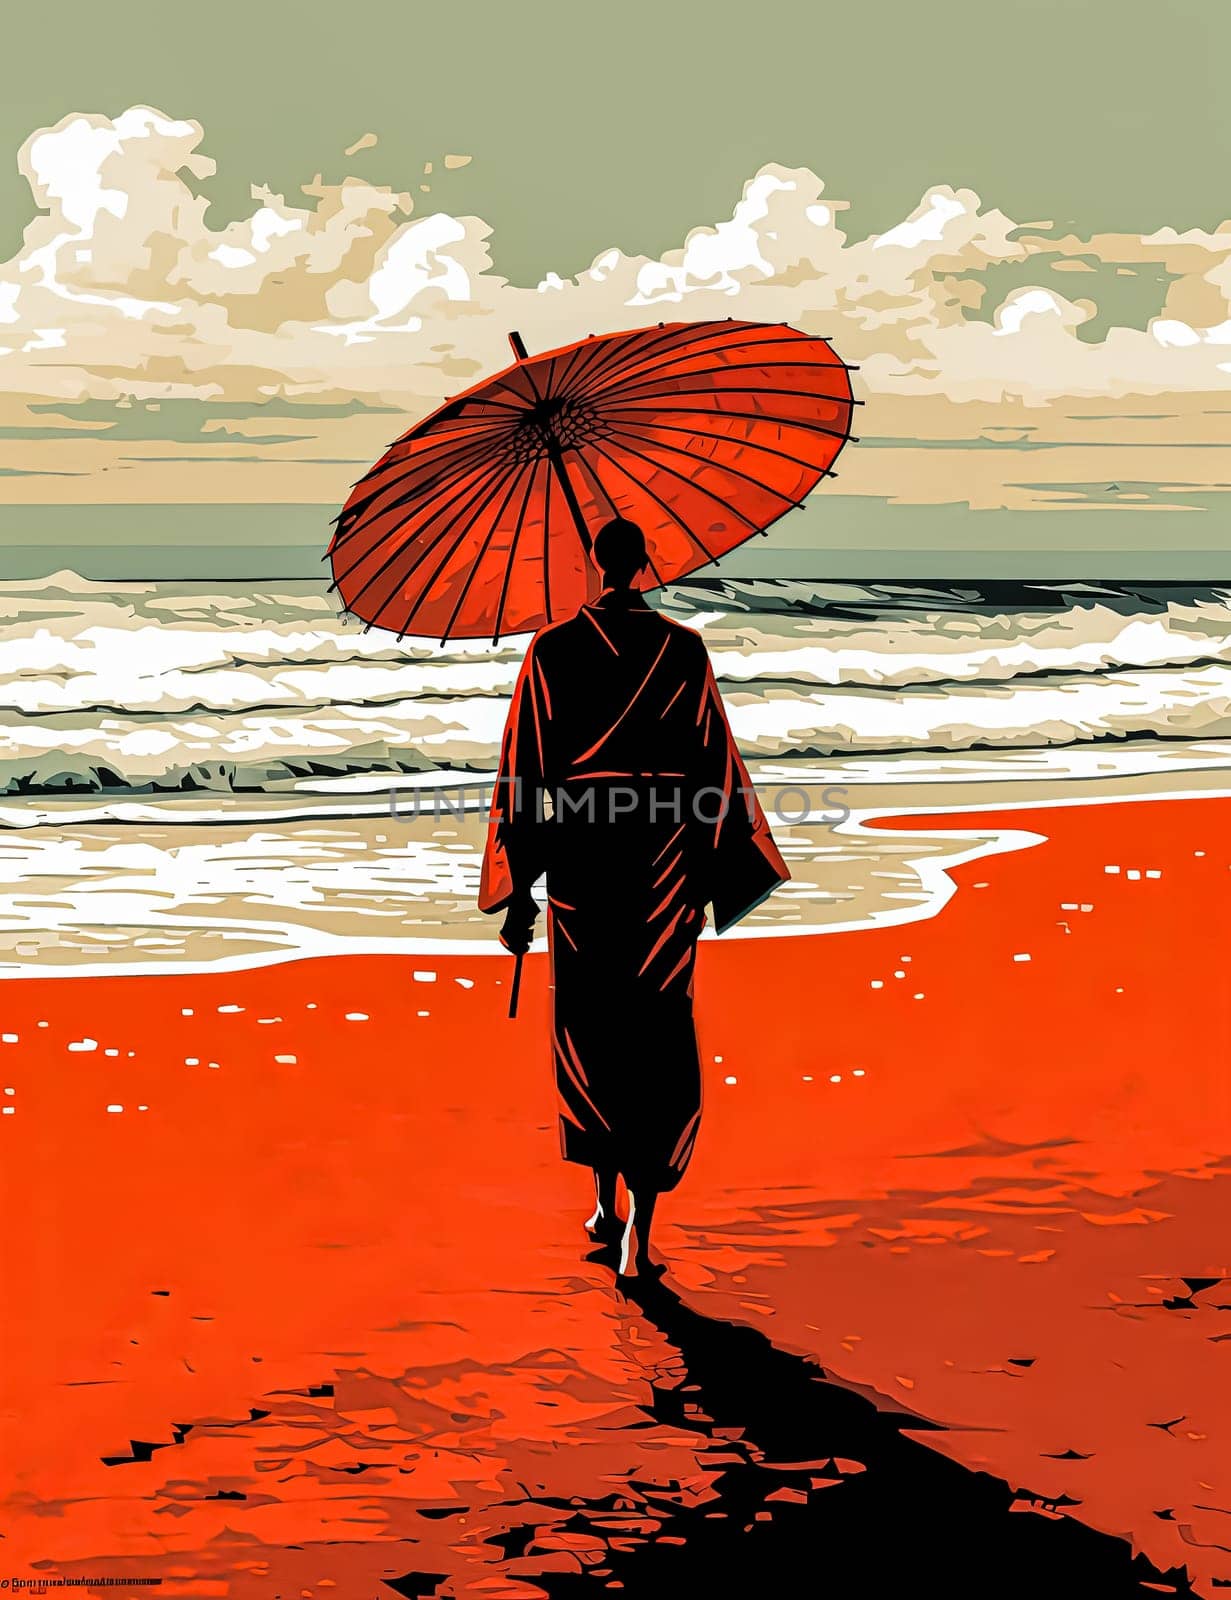 A man is walking on the beach holding an umbrella. The umbrella is red and the man is wearing a robe. The beach is a beautiful, serene place with the ocean in the background